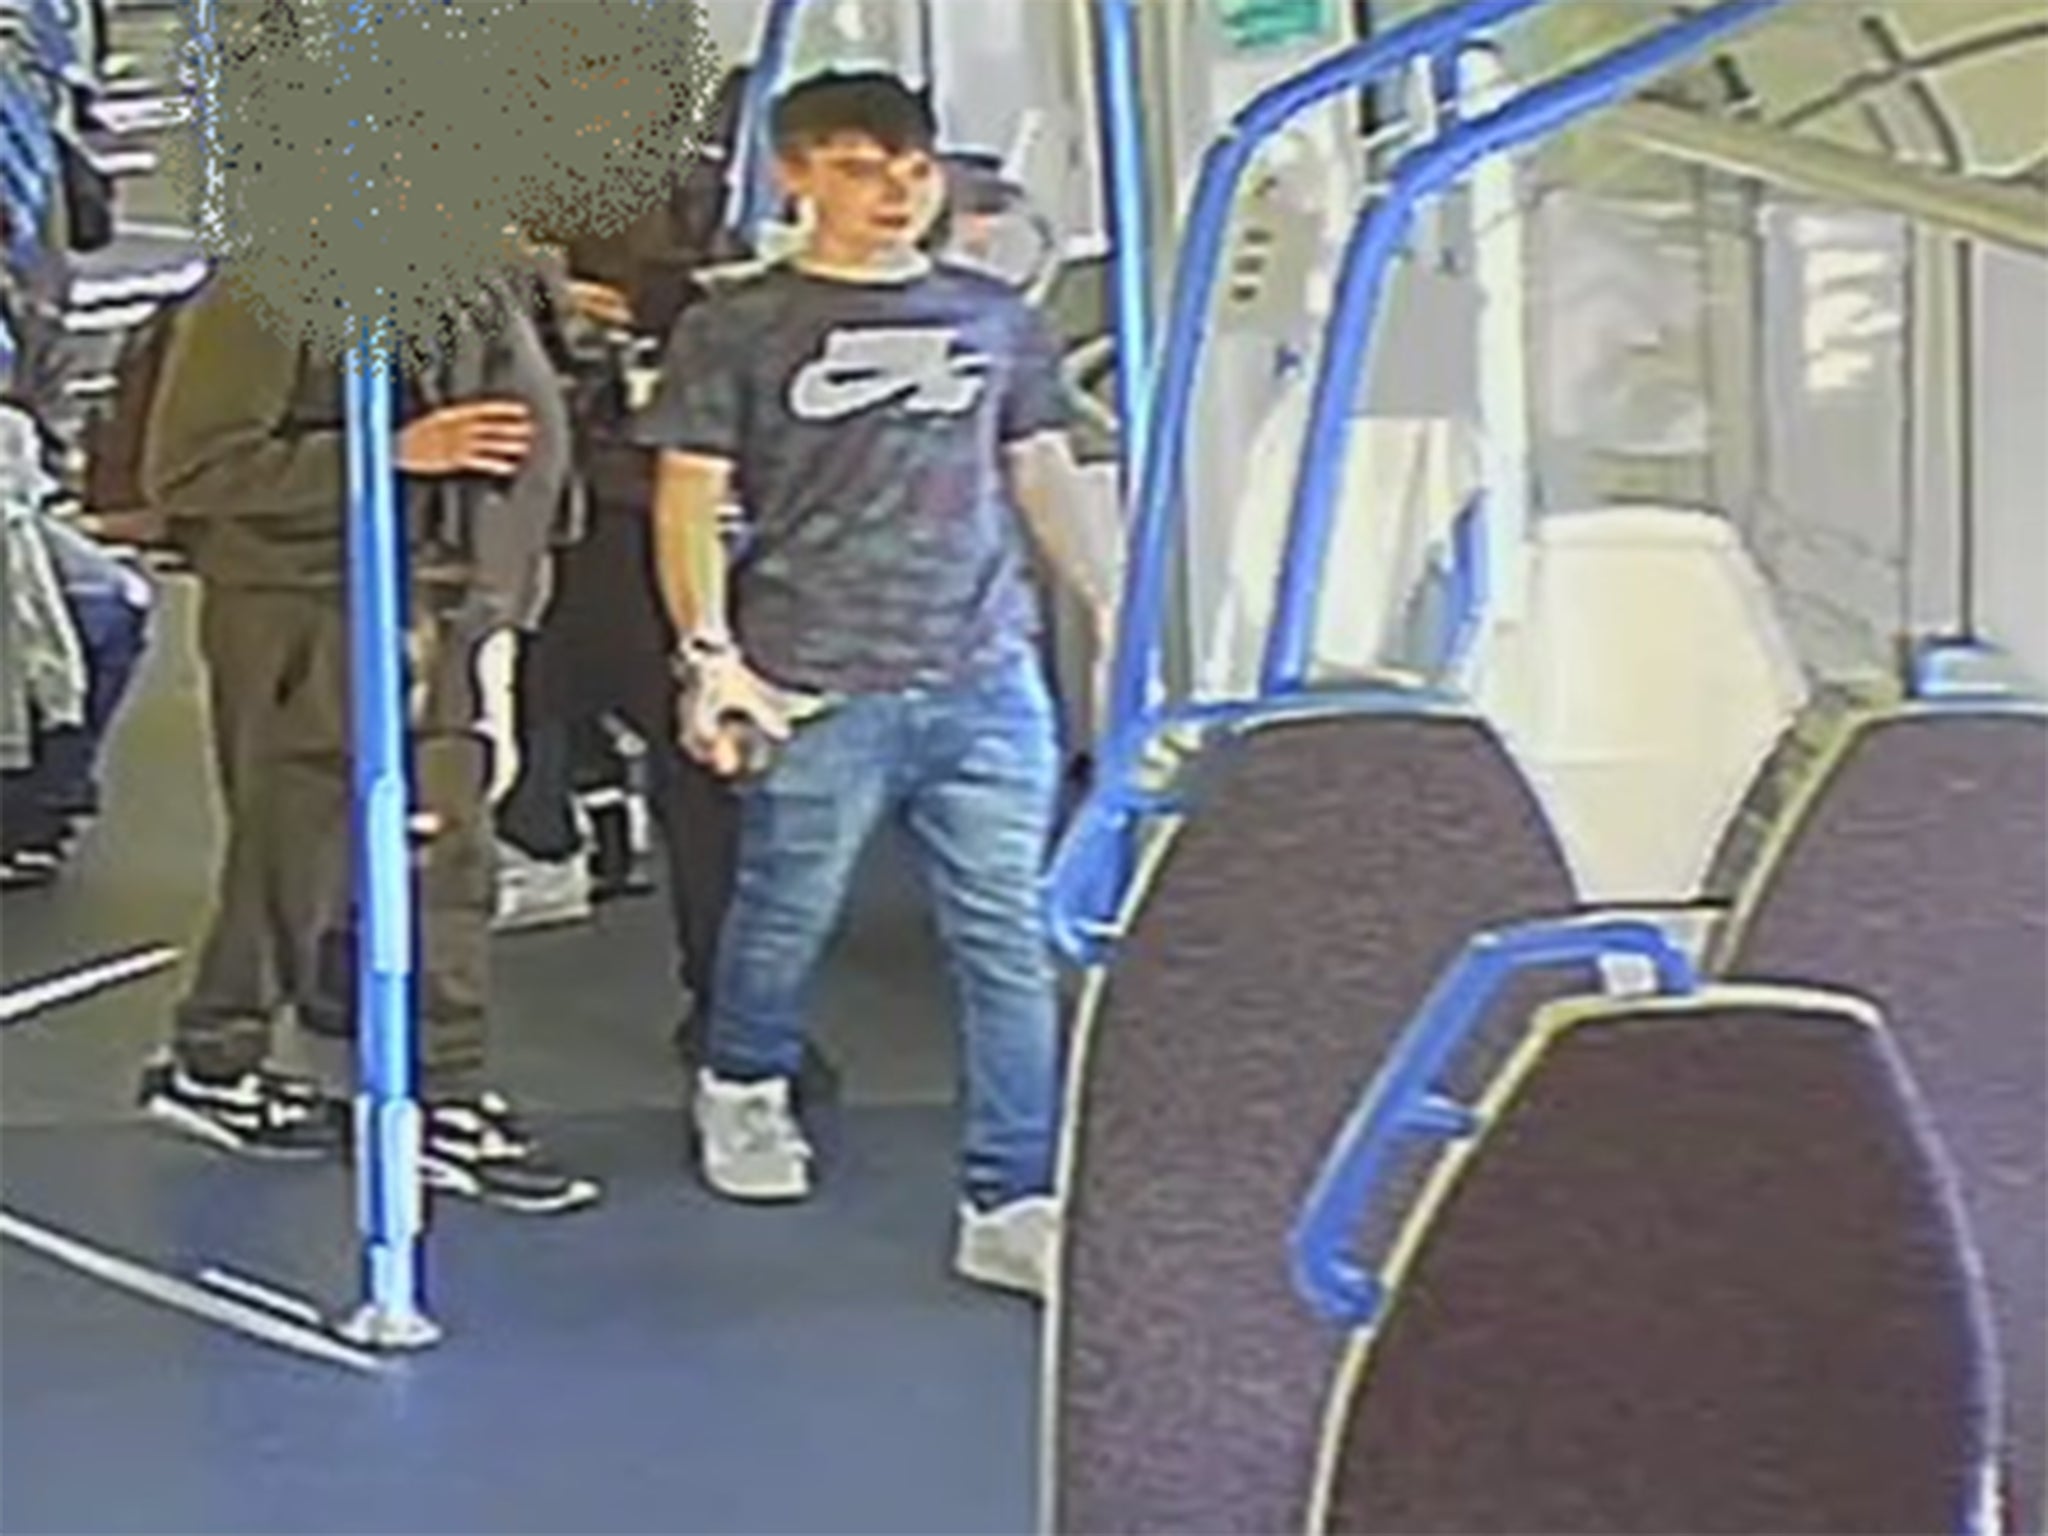 Police want to speak to the man pictured here on CCTV.